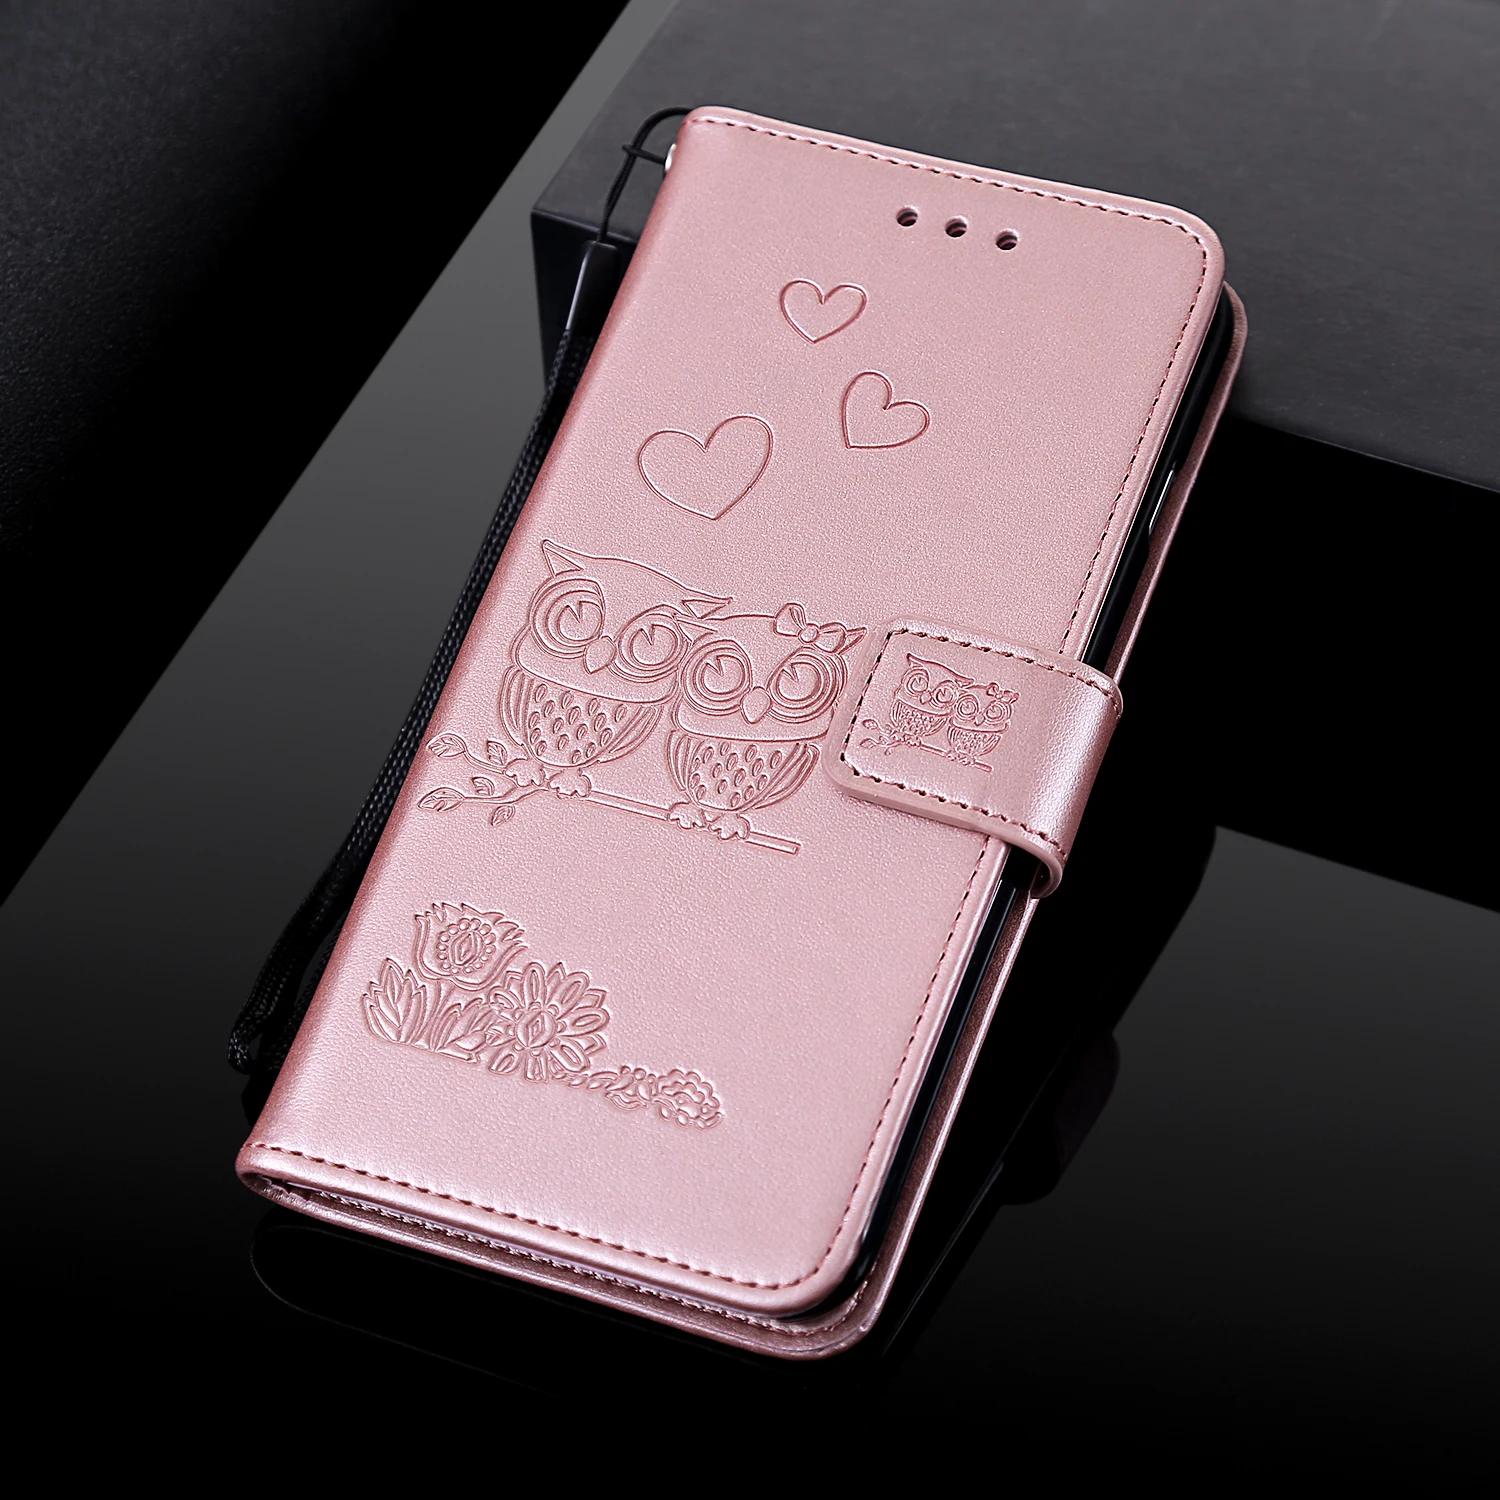 Cute Embossed Love Owl Leather Wallet Case For Huawei Y6 Y7 2019 P10 P20 P30 Lite Honor 20 Pro 9 10 8A 8X Flip Cover Glove | Мобильные